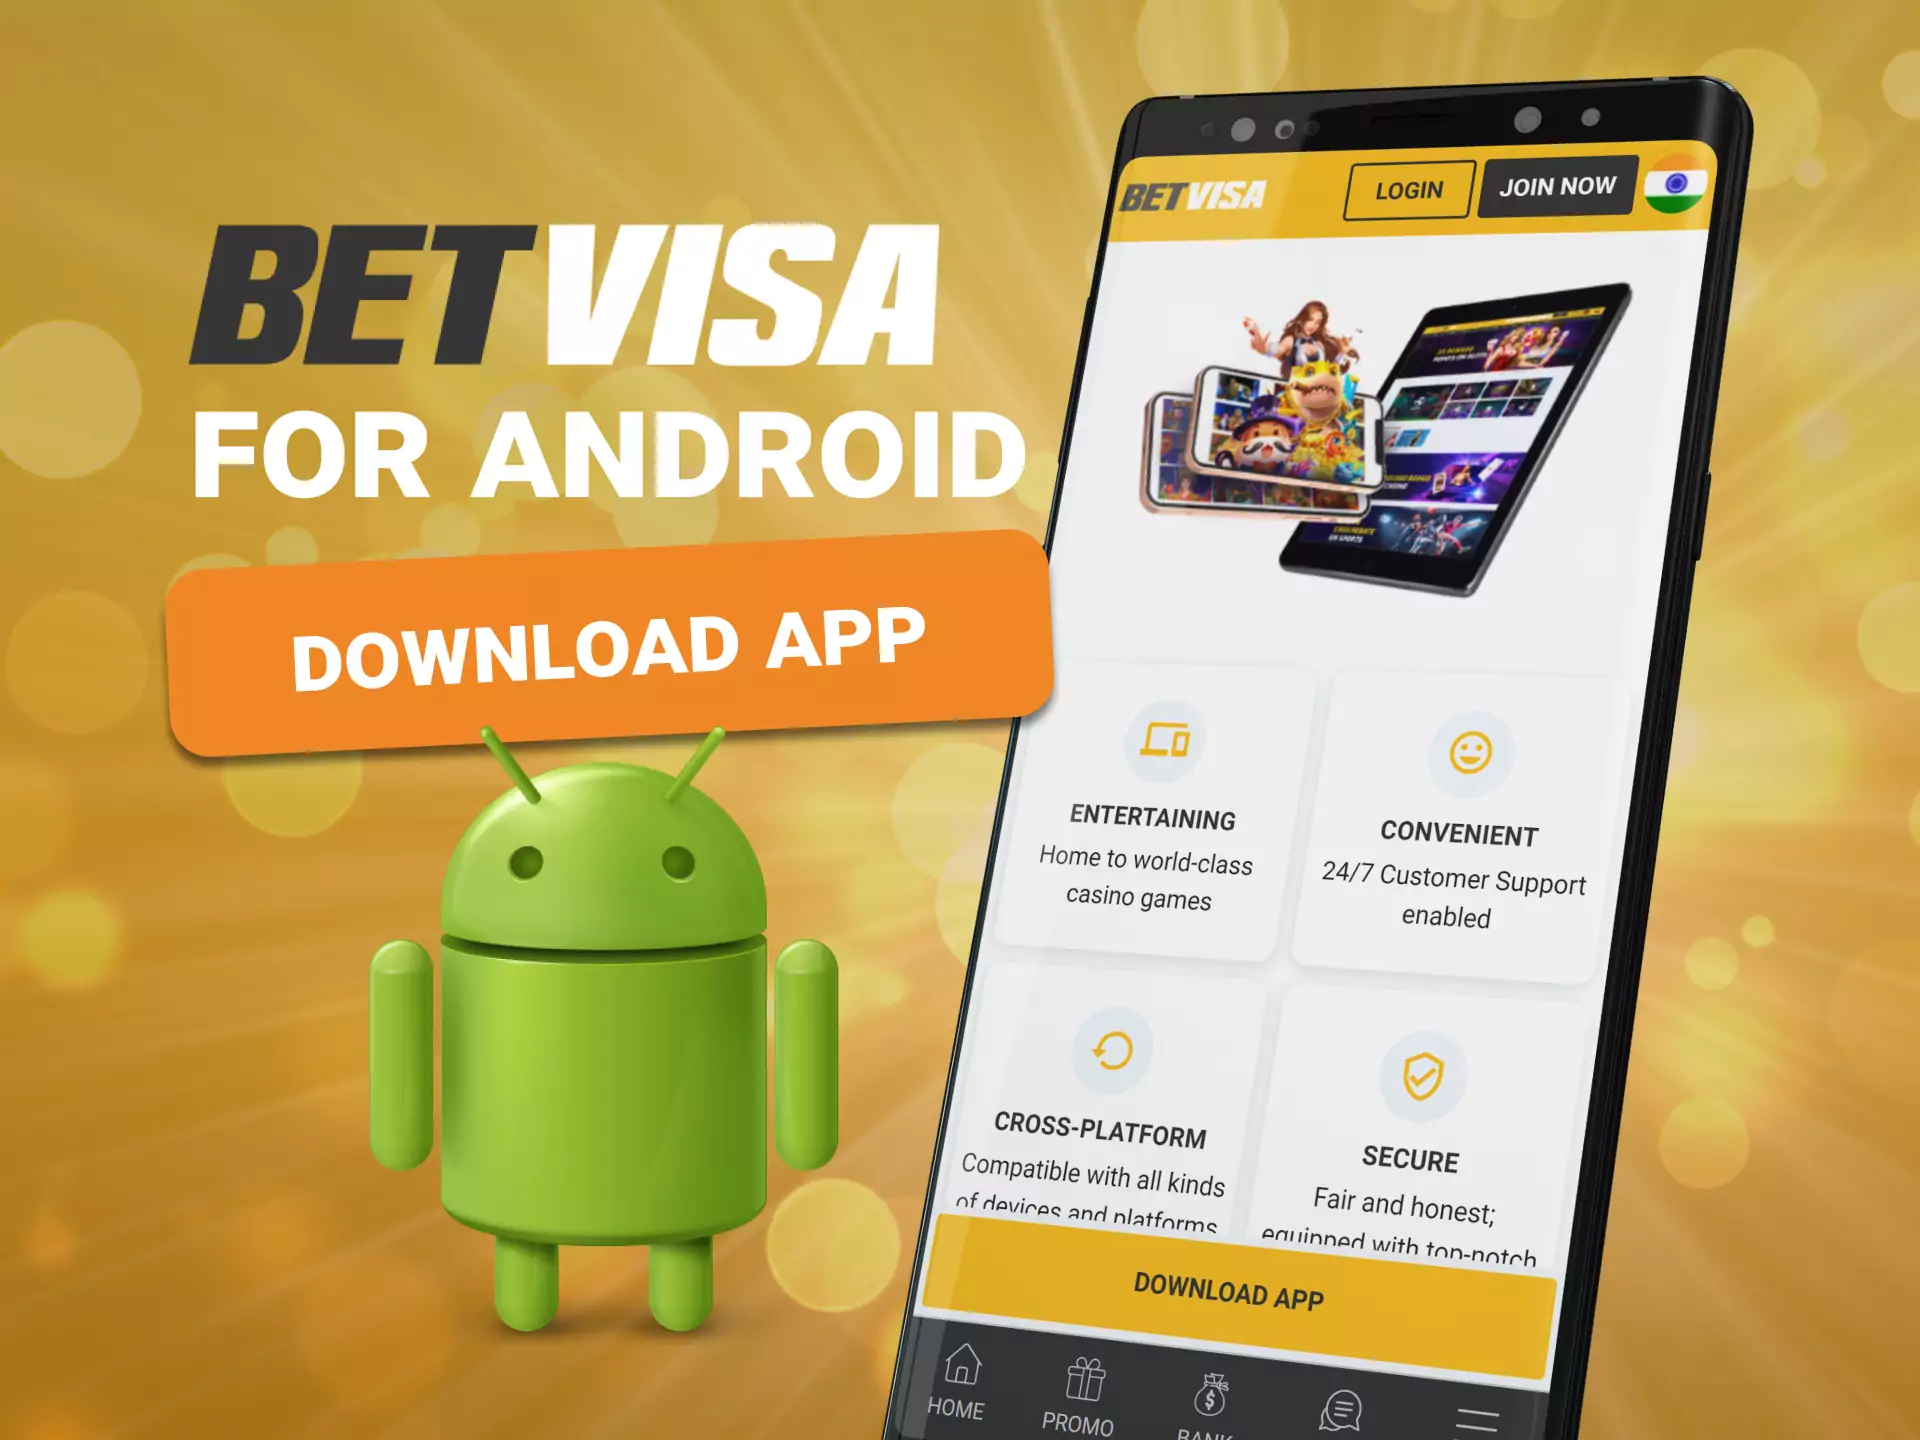 For Android devices, you can download the Betvisa app.